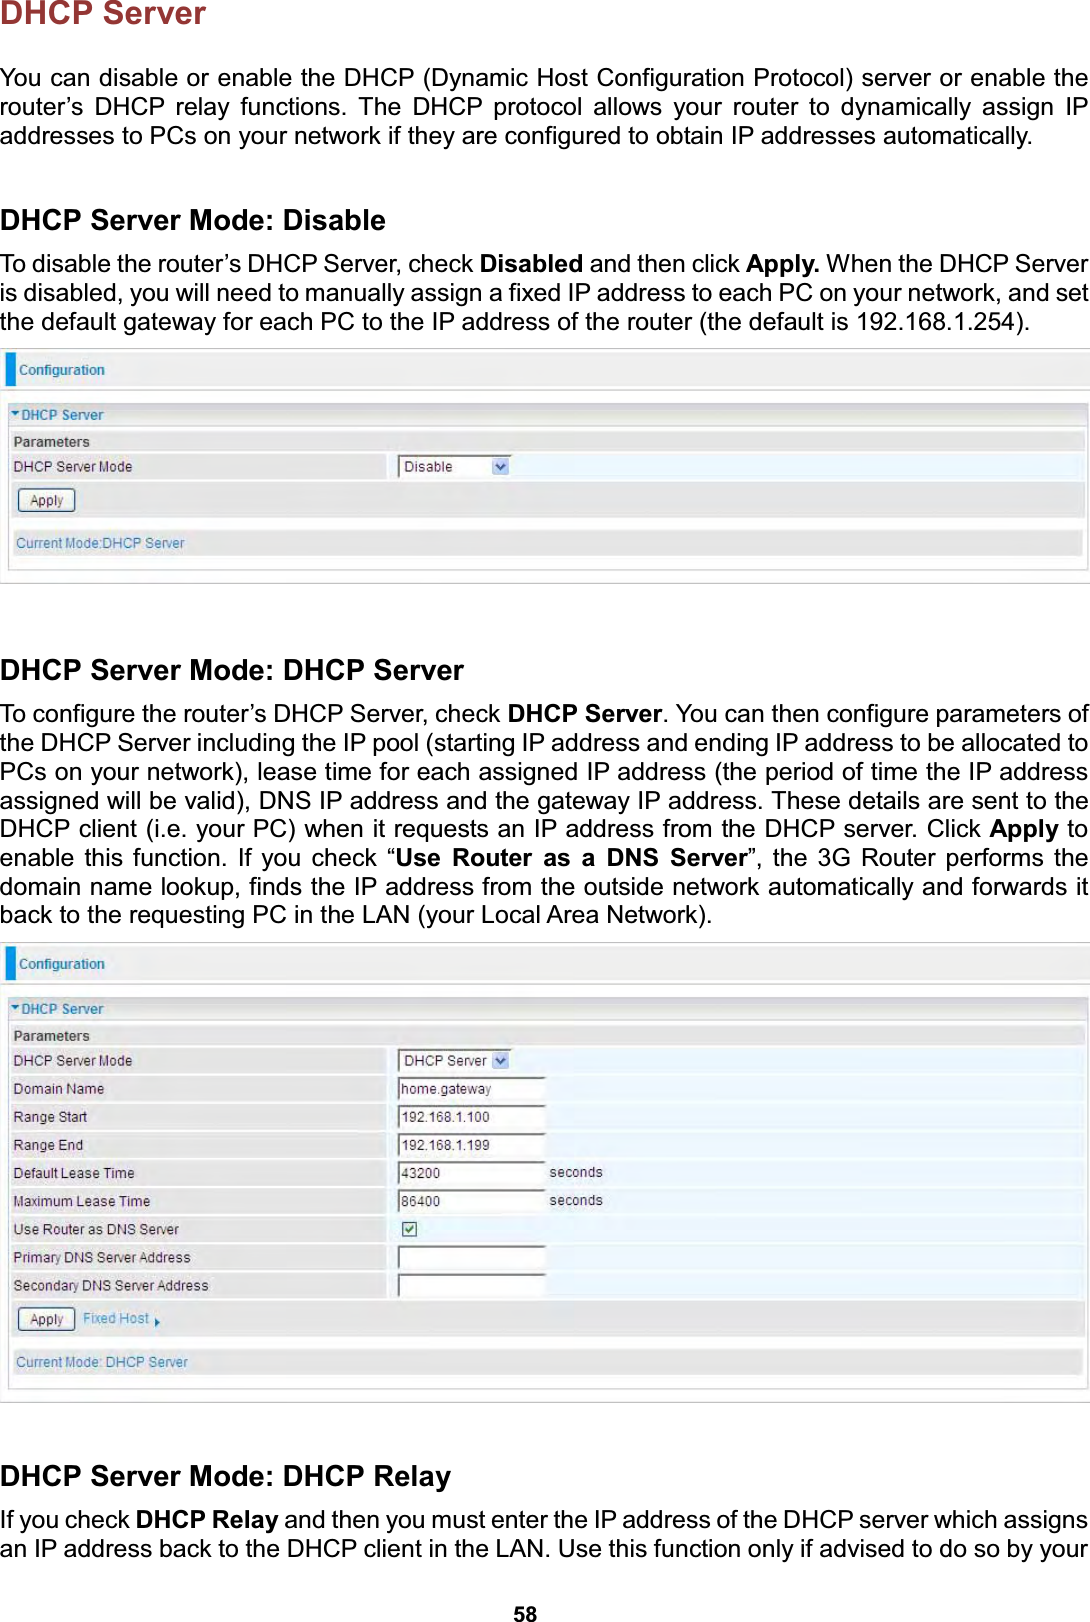  58 DHCP Server   You can disable or enable the DHCP (Dynamic Host Configuration Protocol) server or enable the router’s DHCP relay functions. The DHCP protocol allows your router to dynamically assign IP addresses to PCs on your network if they are configured to obtain IP addresses automatically.  DHCP Server Mode: Disable To disable the router’s DHCP Server, check Disabled and then click Apply. When the DHCP Server is disabled, you will need to manually assign a fixed IP address to each PC on your network, and set the default gateway for each PC to the IP address of the router (the default is 192.168.1.254).    DHCP Server Mode: DHCP Server To configure the router’s DHCP Server, check DHCP Server. You can then configure parameters of the DHCP Server including the IP pool (starting IP address and ending IP address to be allocated to PCs on your network), lease time for each assigned IP address (the period of time the IP address assigned will be valid), DNS IP address and the gateway IP address. These details are sent to the DHCP client (i.e. your PC) when it requests an IP address from the DHCP server. Click Apply to enable this function. If you check “Use Router as a DNS Server”, the 3G Router performs the domain name lookup, finds the IP address from the outside network automatically and forwards it back to the requesting PC in the LAN (your Local Area Network).    DHCP Server Mode: DHCP Relay If you check DHCP Relay and then you must enter the IP address of the DHCP server which assigns an IP address back to the DHCP client in the LAN. Use this function only if advised to do so by your 